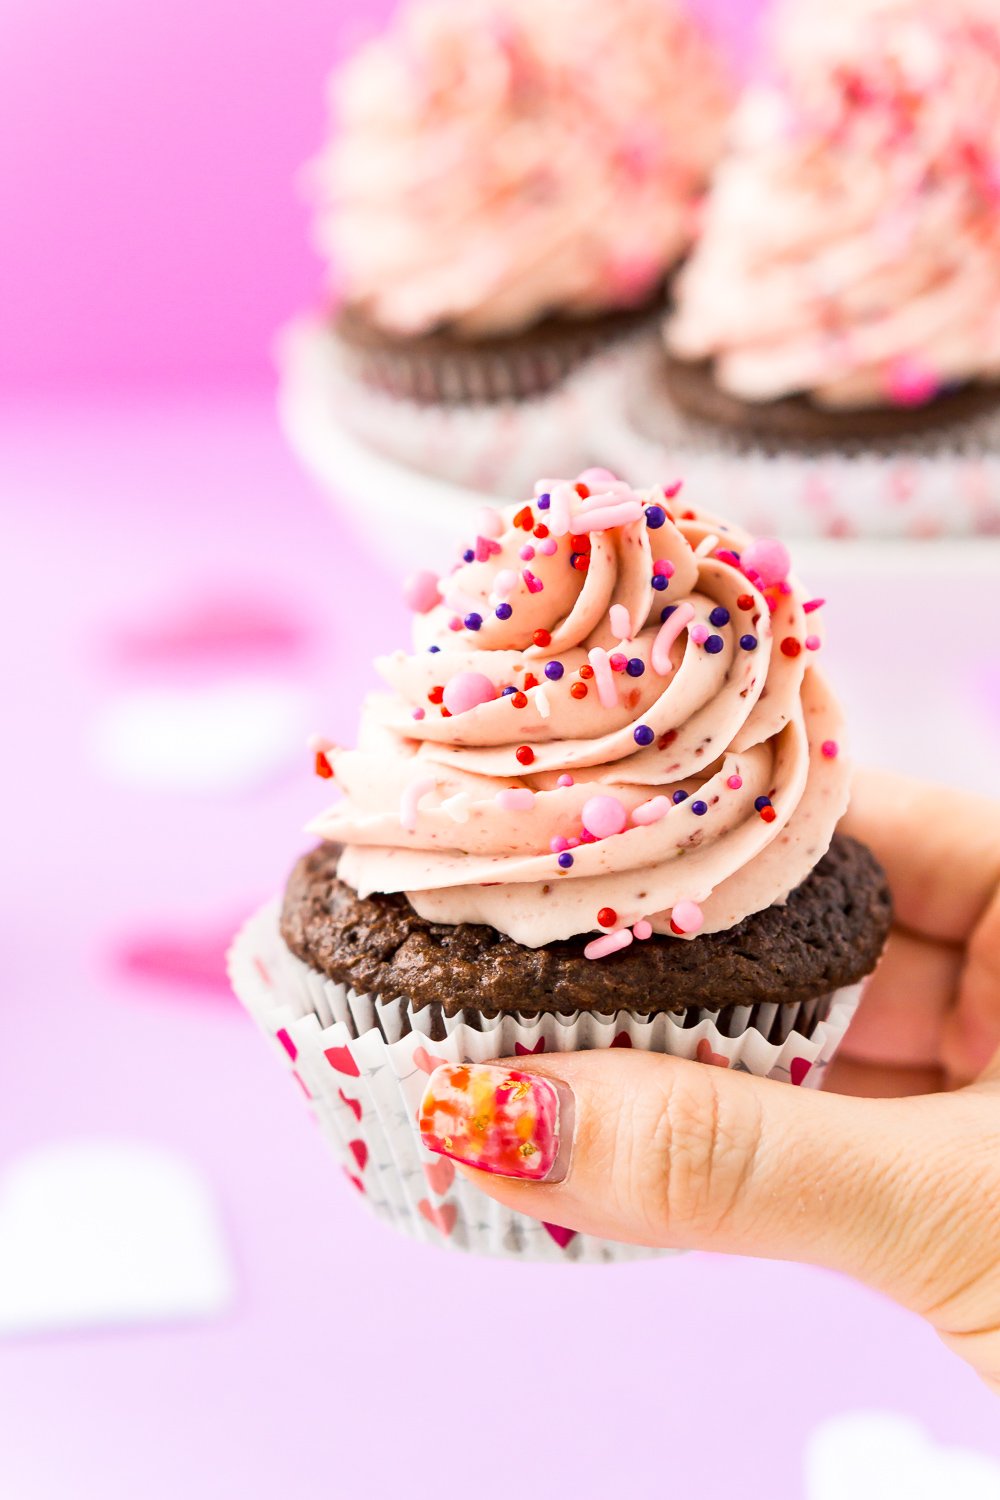 These Strawberry Chocolate Cupcakes are a delicious blend of rich chocolate cake and sweet strawberry whipped cream frosting! Perfect for Valentine's Day, Baby Showers, Bridal Showers, and more!